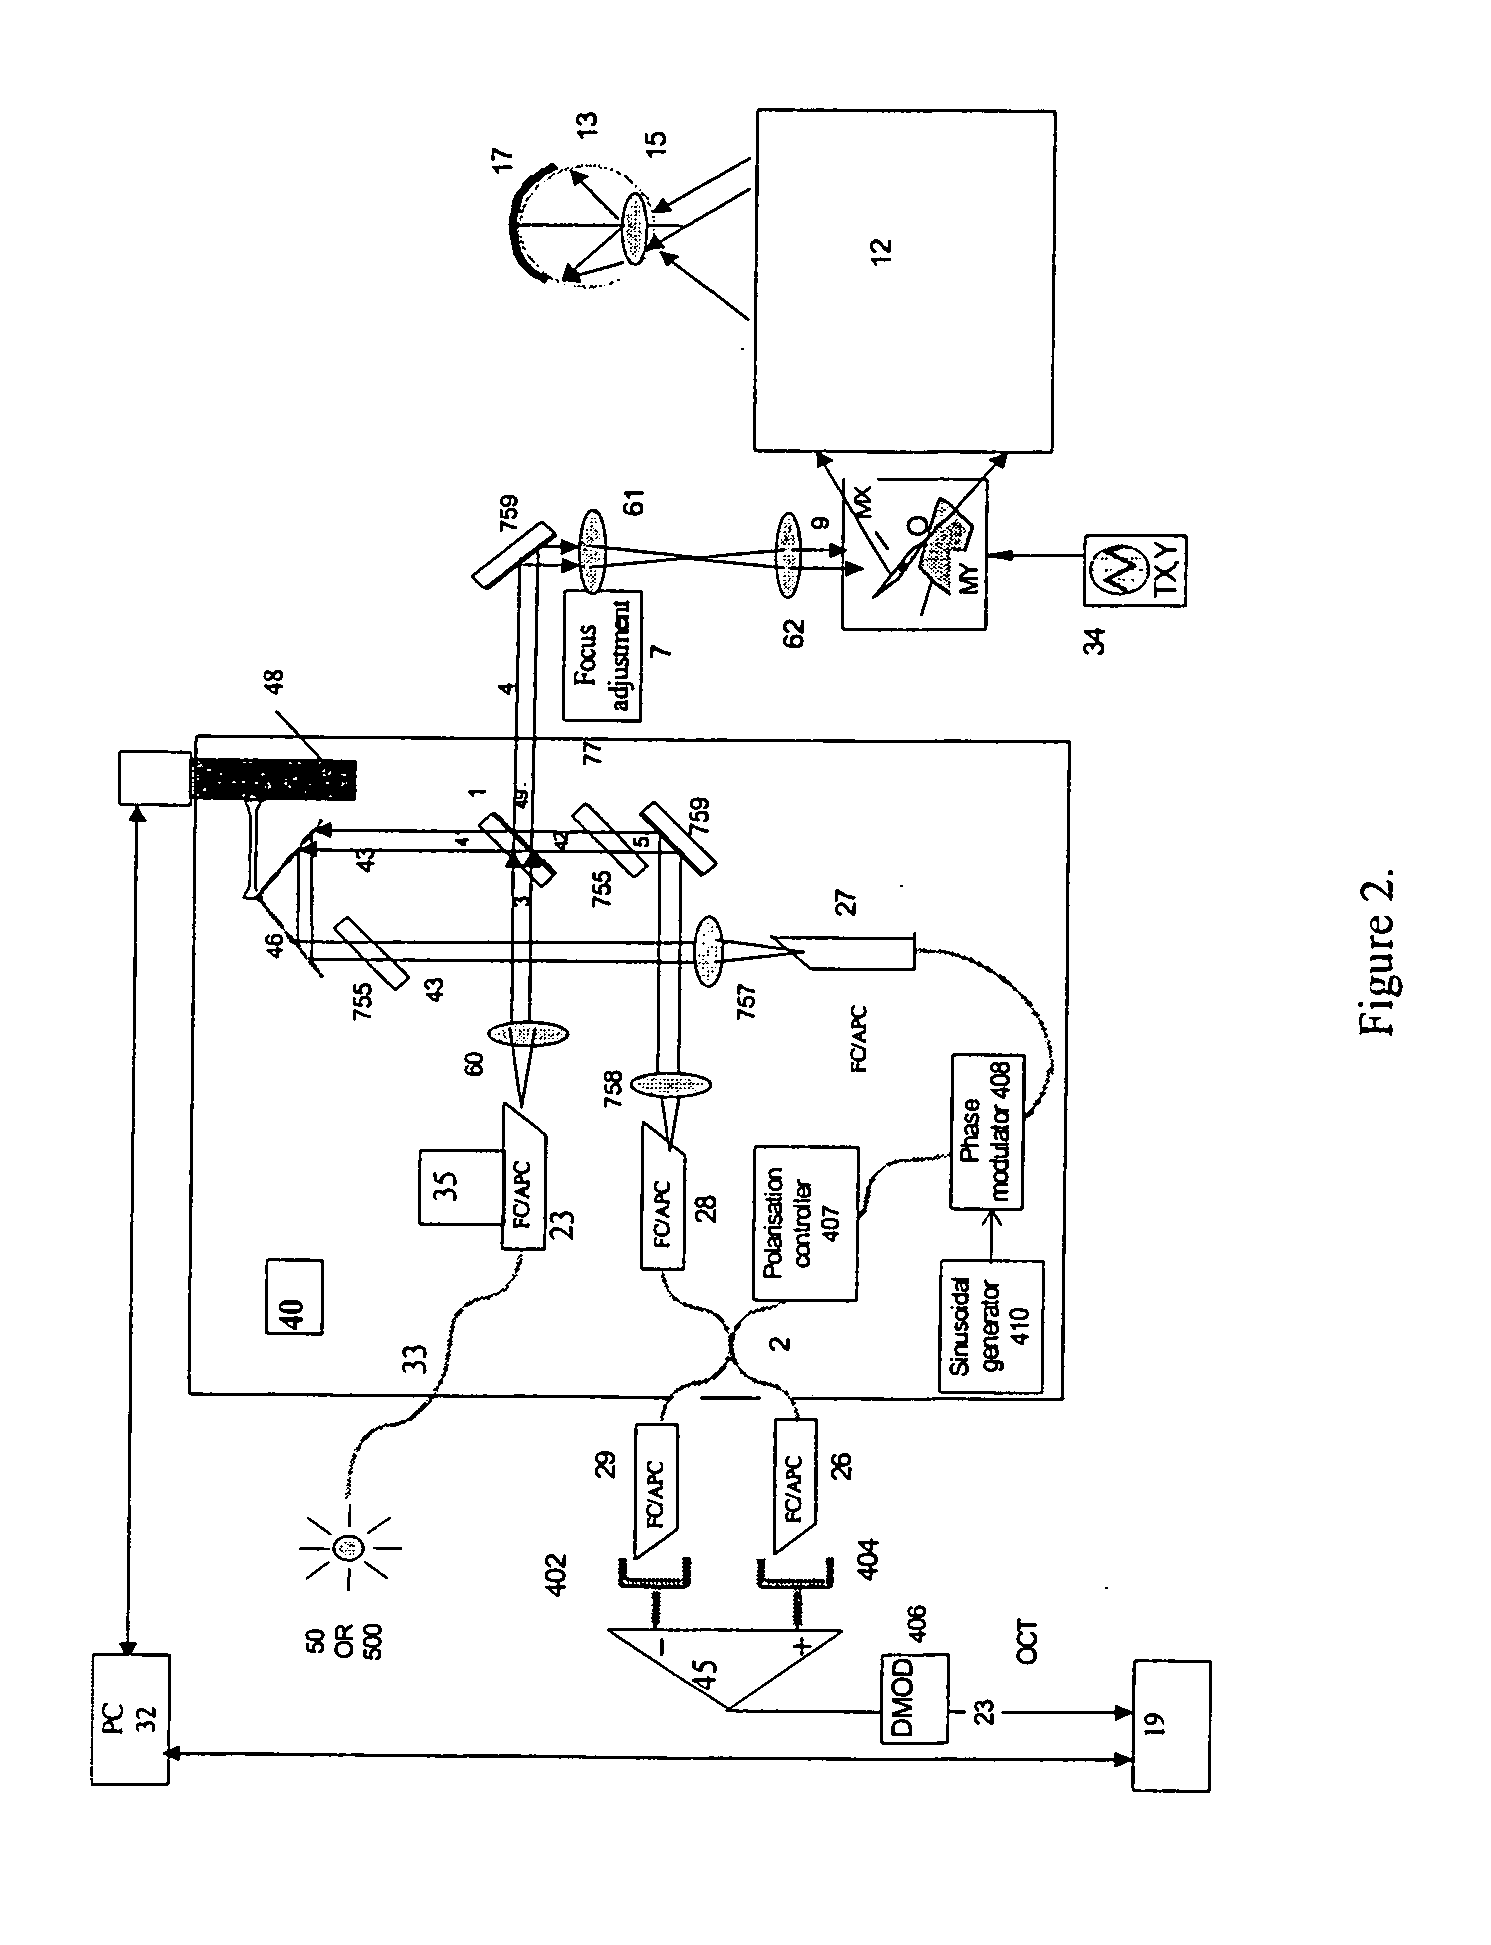 Optical mapping apparatus with optimized OCT configuration